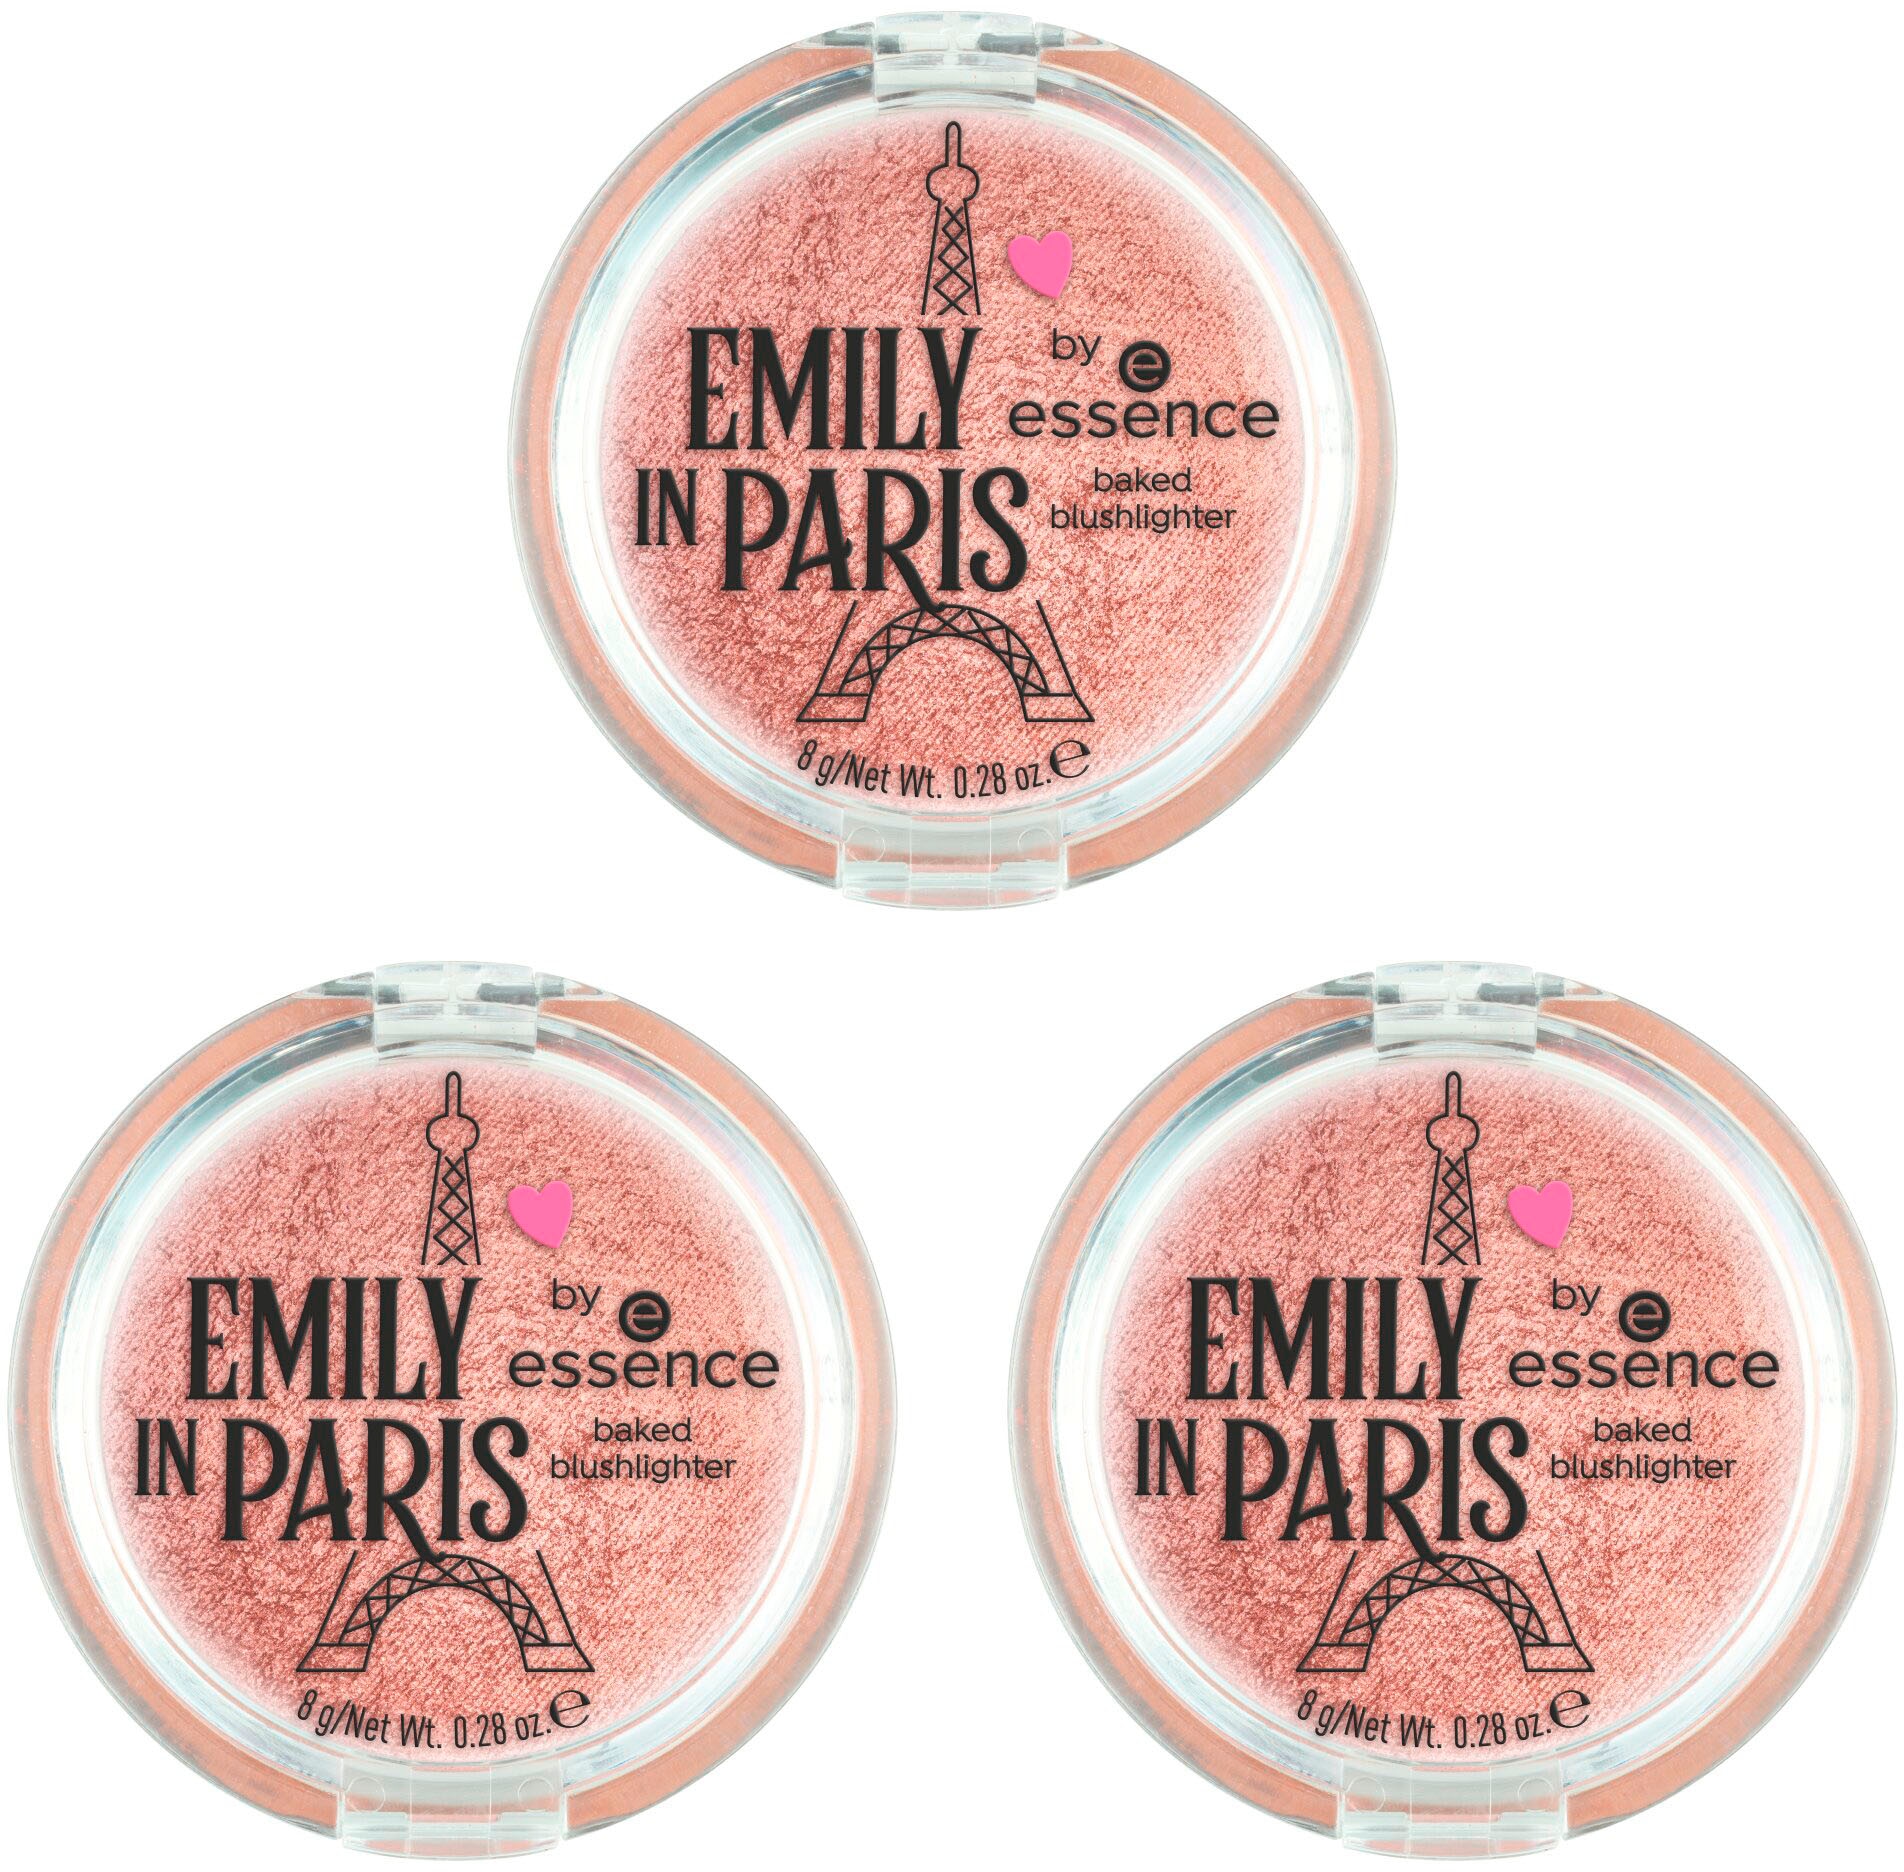 UNIVERSAL online by Essence »EMILY blushlighter« baked essence PARIS bei Rouge IN